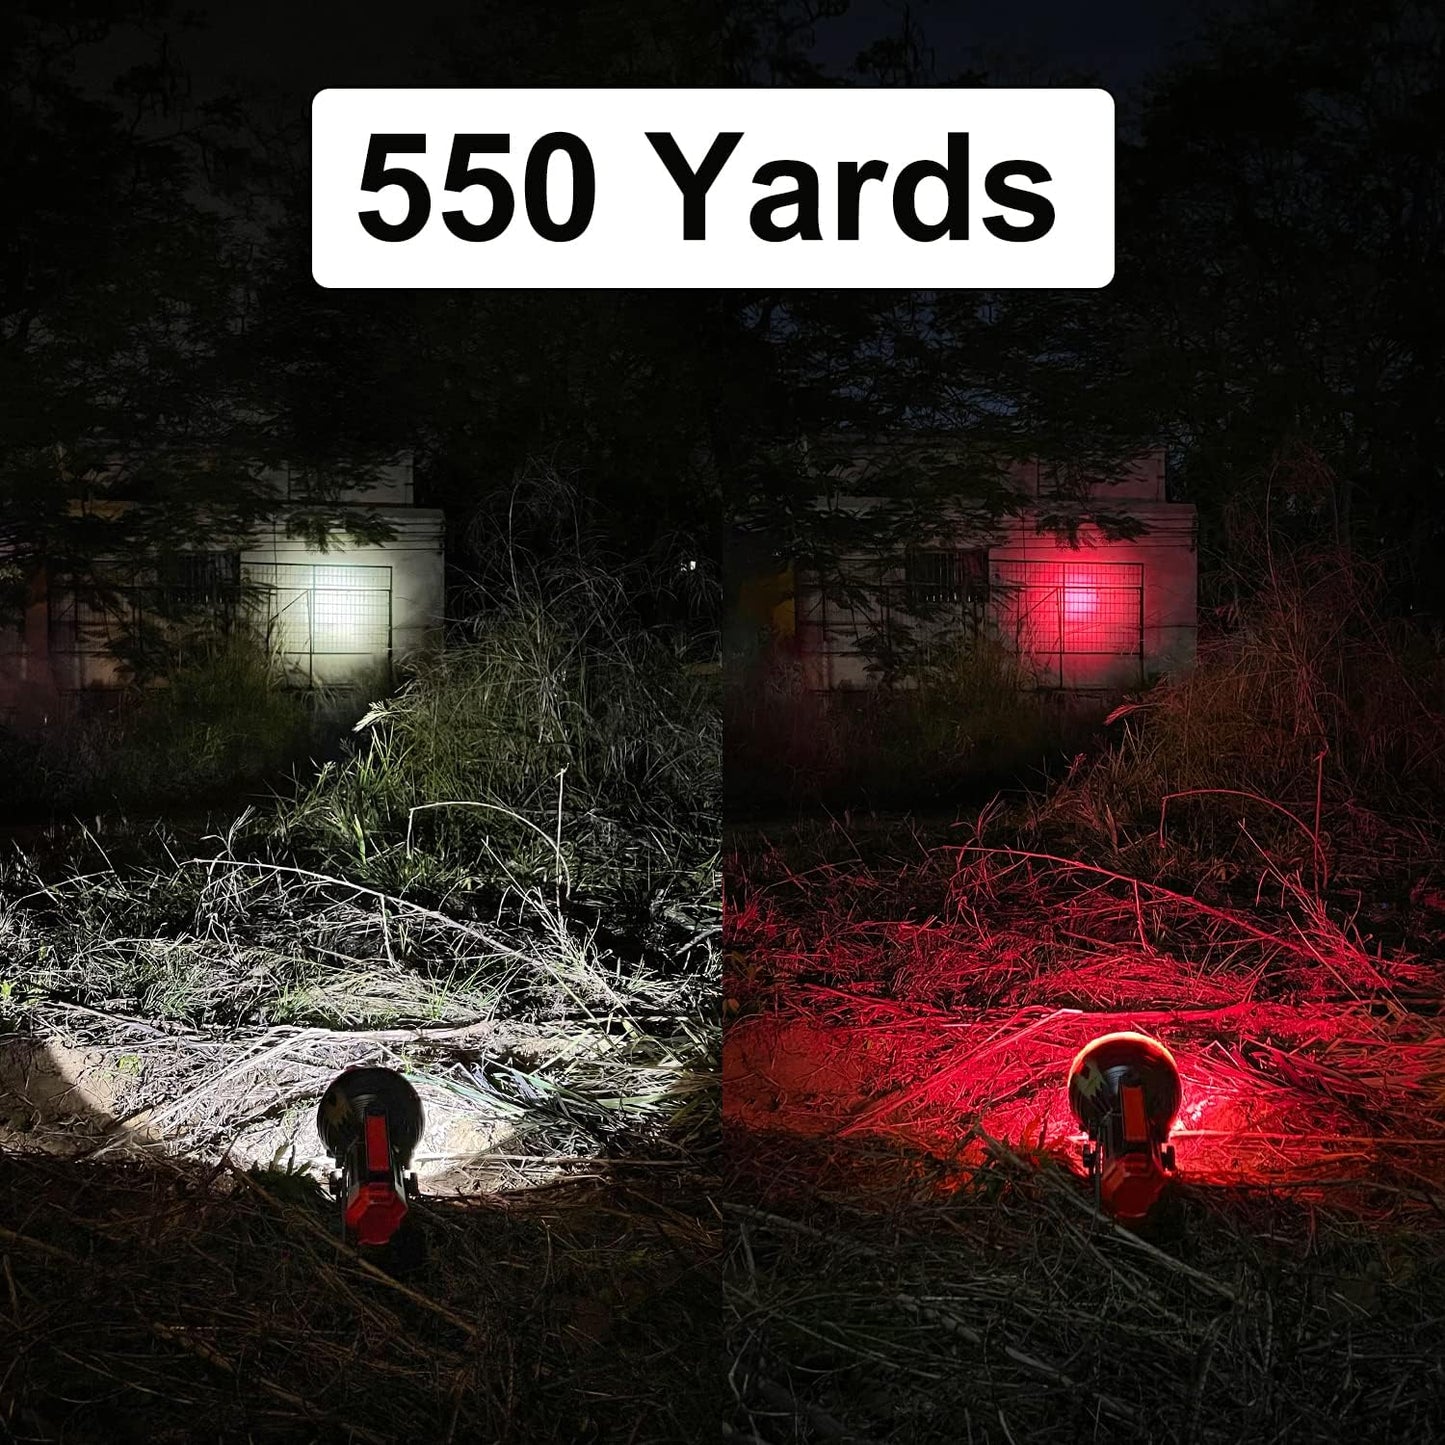 Rechargeable Spotlight Flashlight High Lumens 200000,Large Flashlight with 550 Yards Light Distance, Work Light Spot Lights Outdoor Handheld, Waterproof Searchlight with Stand&red Lens